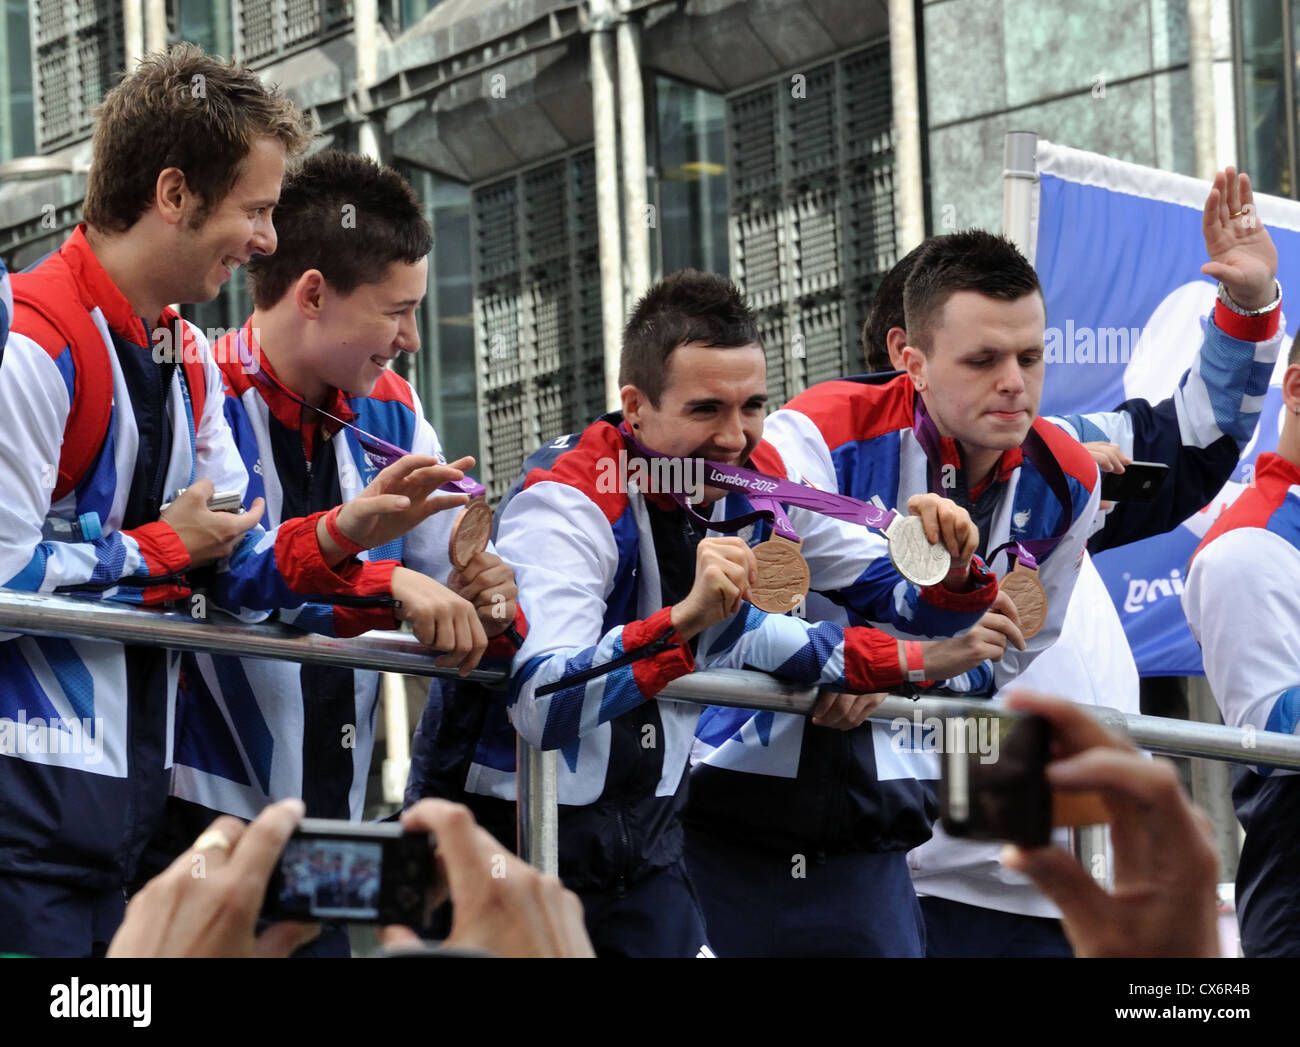 Andrew Baggaley, Ross Wilson, Will Bayley, Aaron McKibbin. Table Tennis.  The London 2012 Medal Winners Parade. Stock Photo